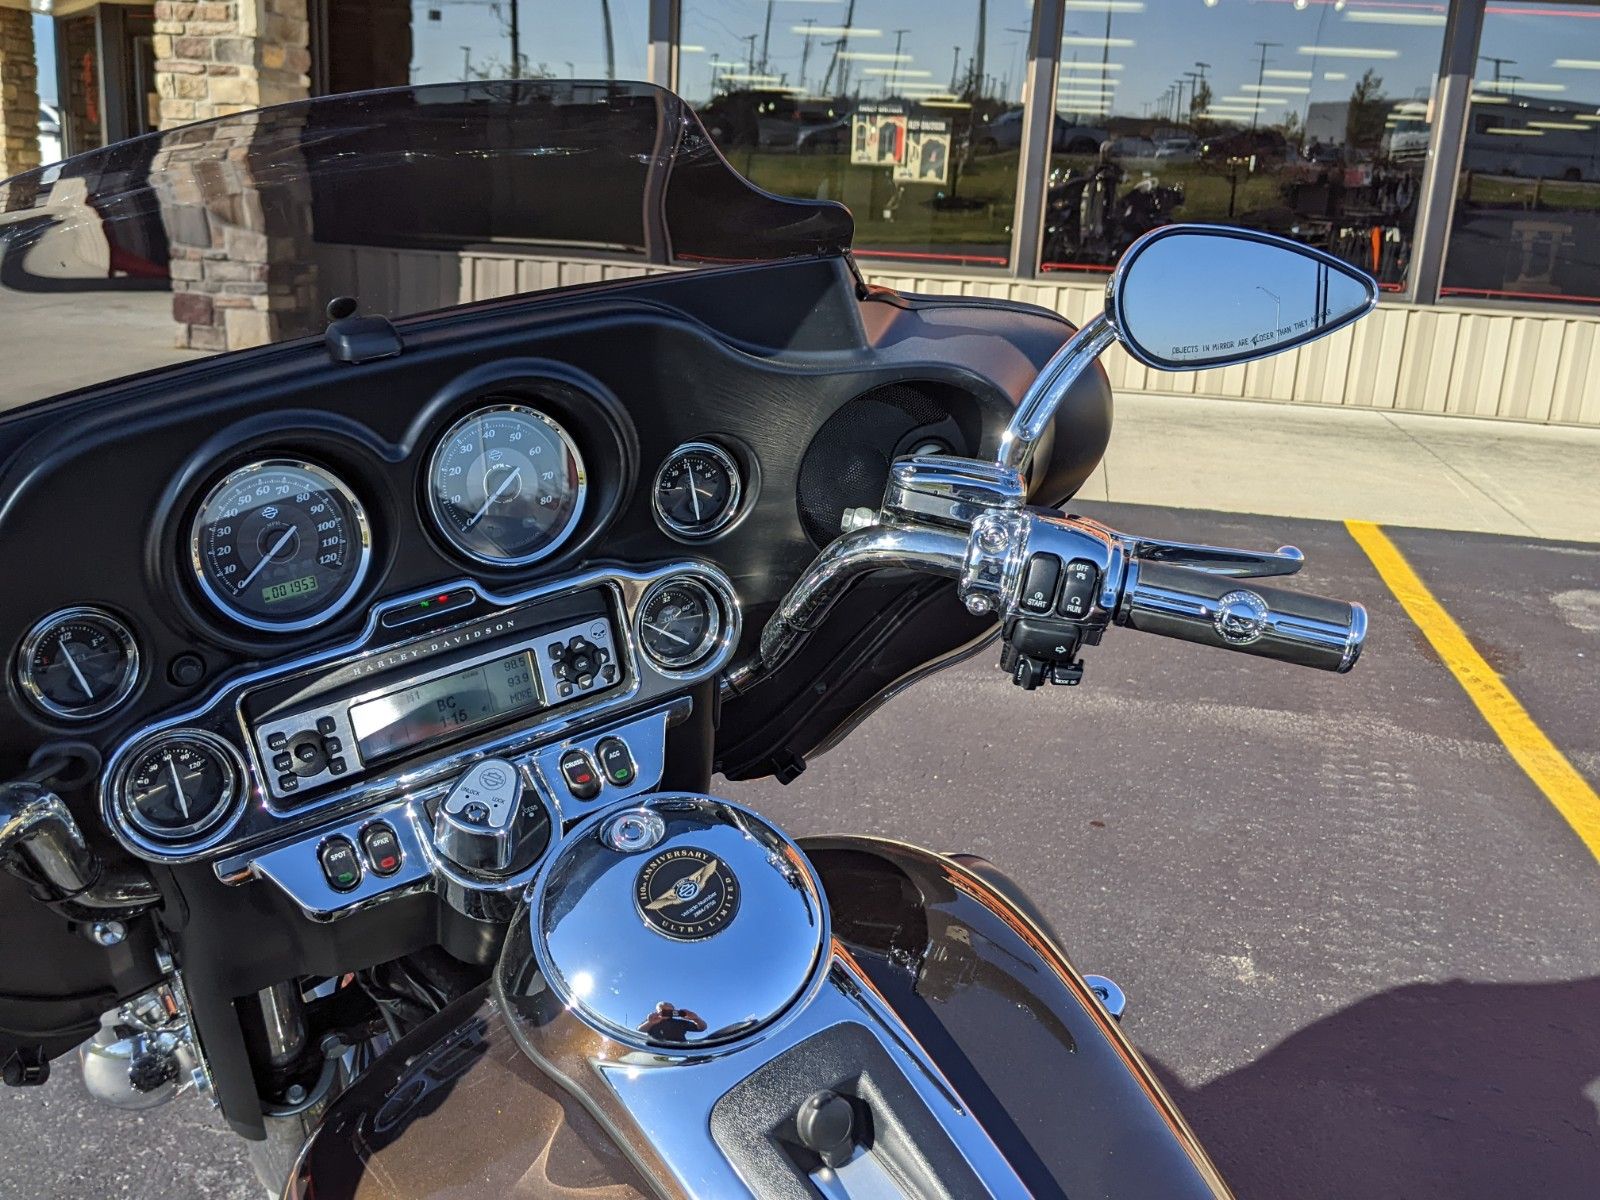 2013 Harley-Davidson Electra Glide® Ultra Limited 110th Anniversary Edition in Muncie, Indiana - Photo 5